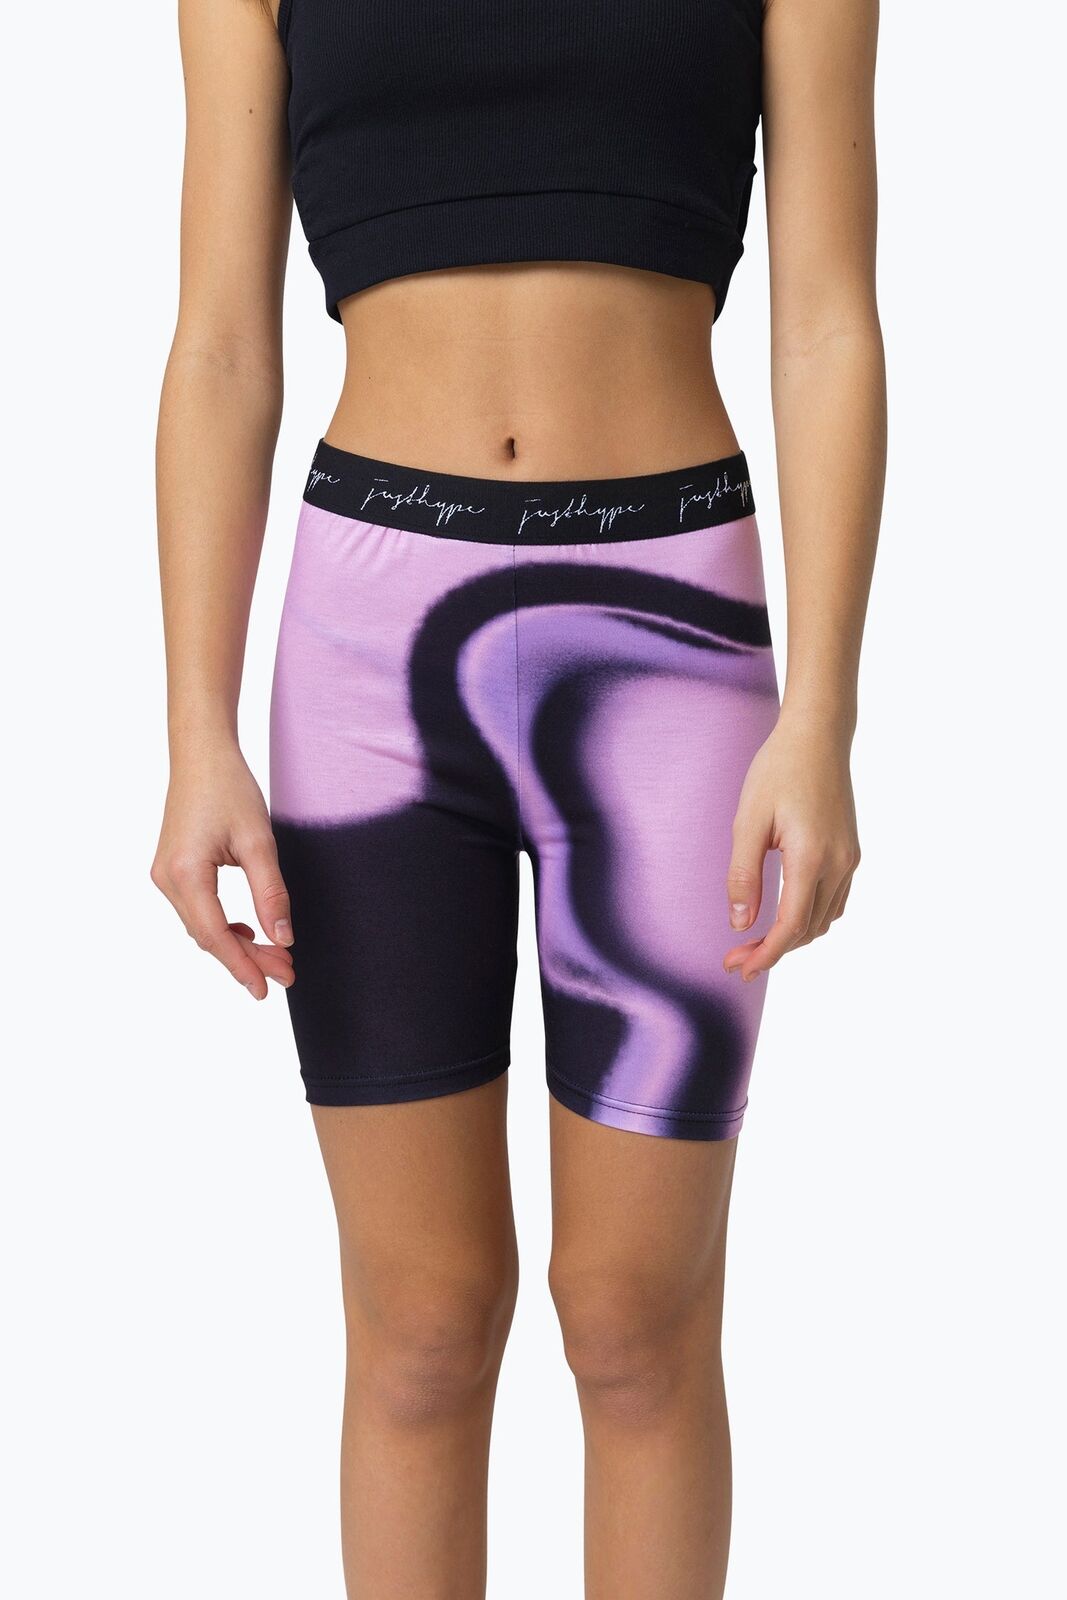 Hype Kids Pink Spray Fade Cycle Shorts - 11/12Y